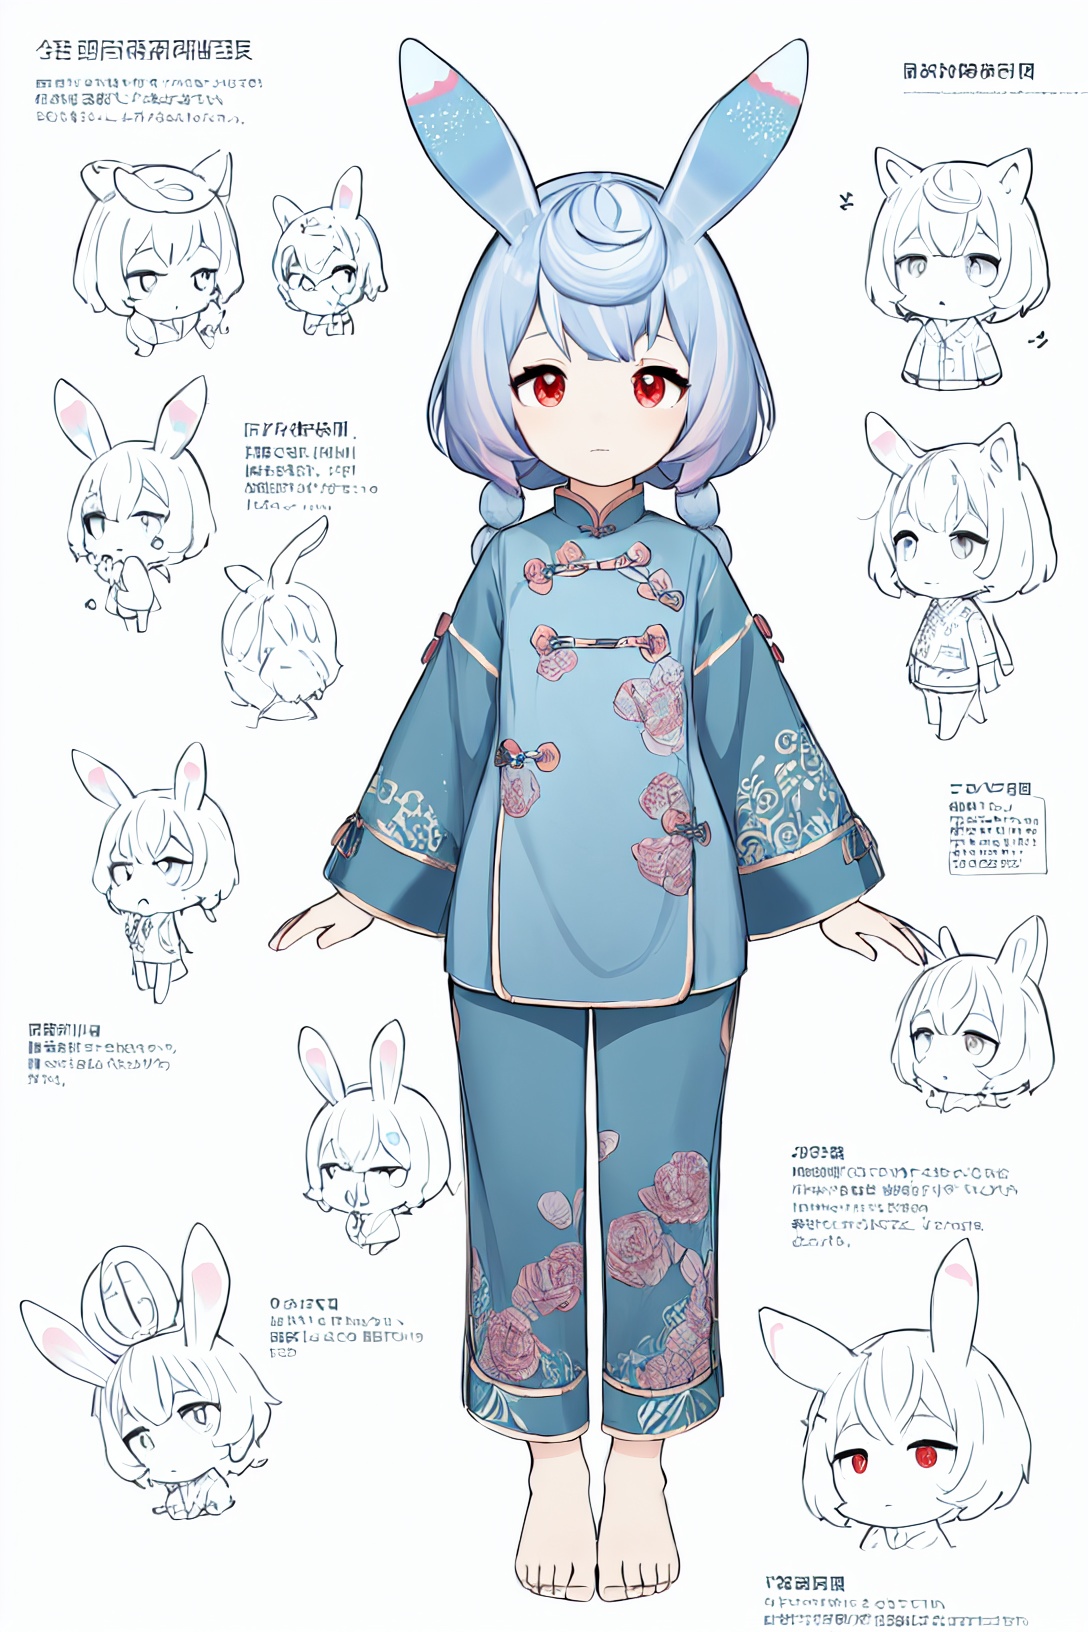 multiple views, pencil sketch, (sketch:1.25), (loli), ((no shoes)), shy, best quality, graphite \\(medium\\), ske, gradient, rainbow, note, Line draft, highres, absurdres, (ultra-detailed:1.1), (illustration:1.1), (infographic:1.2), pajamas, (all clothes configuration:1.15), (solo), perfectly drawn hands, standing, cohesive background, paper, action, (character design:1.1), china dress, monarch \(black gerard\) \(azur lane\), <lora:Sigewinne-v100-000019:0.8>, Sigewinne, 1girl, red eyes, animal ears, chibi, rabbit ears, <lora:Anime Lineart ,Manga-like (线稿,線画,マンガ風,漫画风) Style:0.4>, <lora:Sketchy - Style:0.2>, [[delicate fingers and hands:0.55]::0.85], (detail fingers), (empty hands:1.1), bare_hands, (beautiful_face), ((intricate_detail)), (revealing clothes:1.2), clear face, ((finely_detailed)), fine_fabric_emphasis, ((glossy)), 